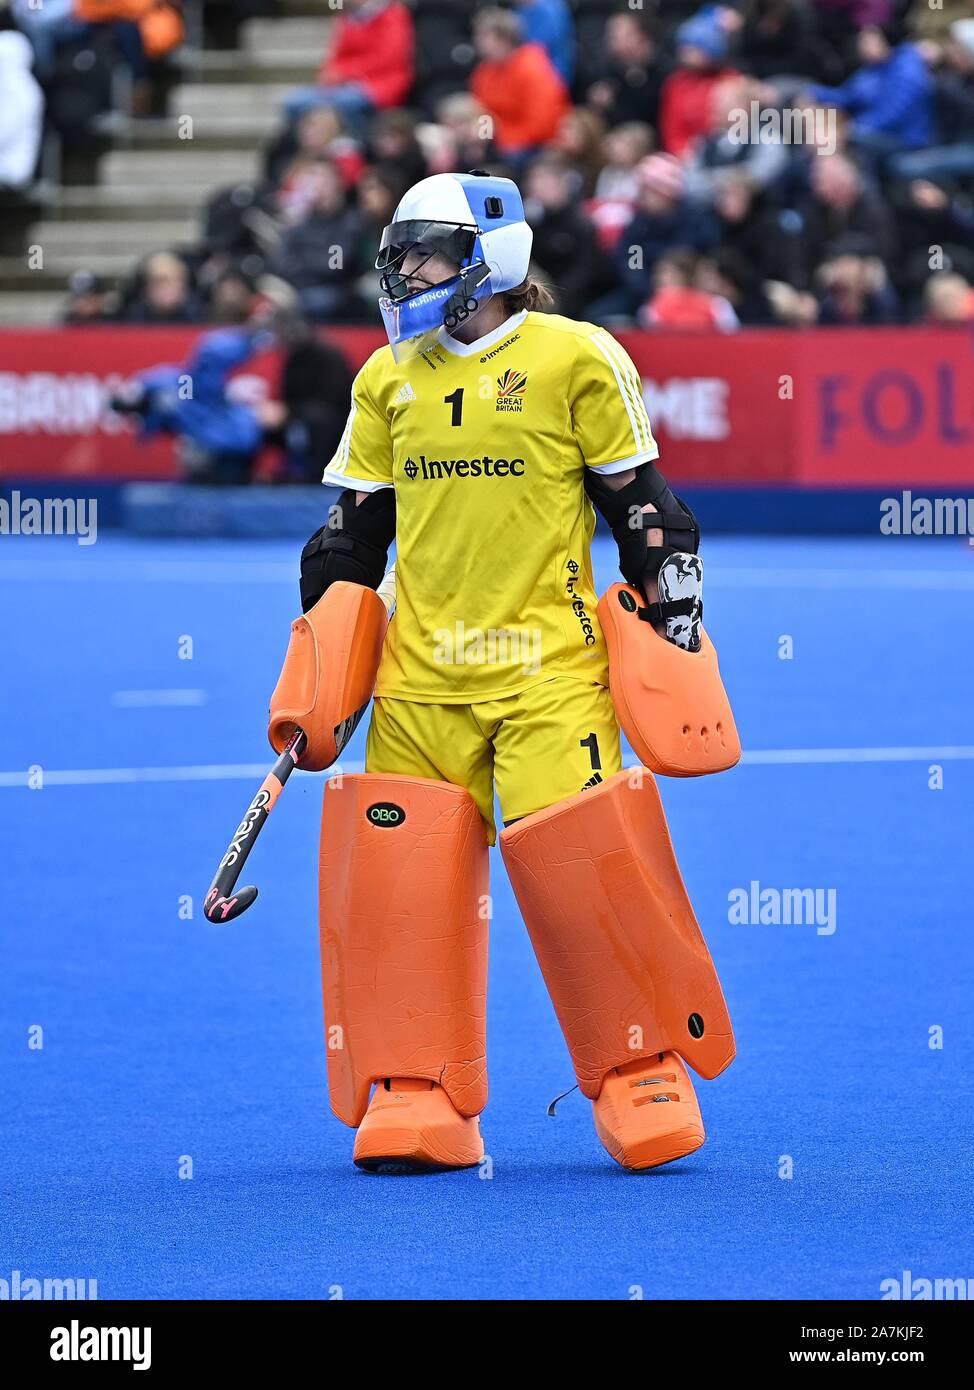 Stratford, London, UK. 3rd November 2019. Maddie Hinch (Great Britain, goalkeeper). Great Britain v Chile. FIH Womens Olympic hockey qualifier. Lee Valley hockey and tennis centre. Stratford. London. United Kingdom. Credit Garry Bowden/Sport in PicturesAlamy Live News. Stock Photo